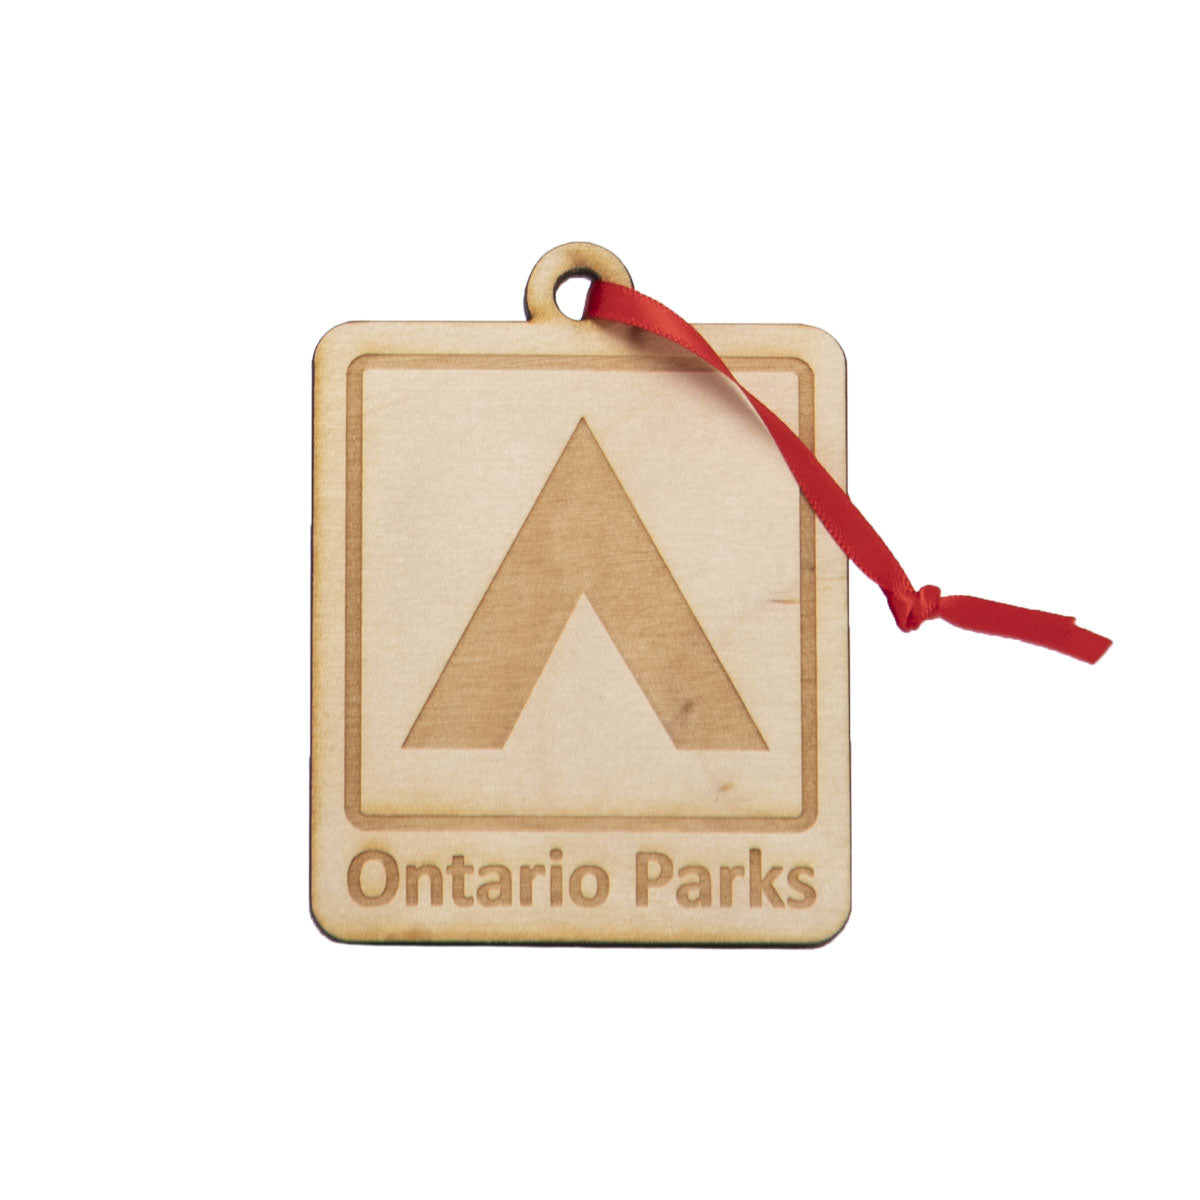 Wooden Ontario Parks square holiday ornament, showing etched graphic of Tent icon. Hung on red ribbon. 